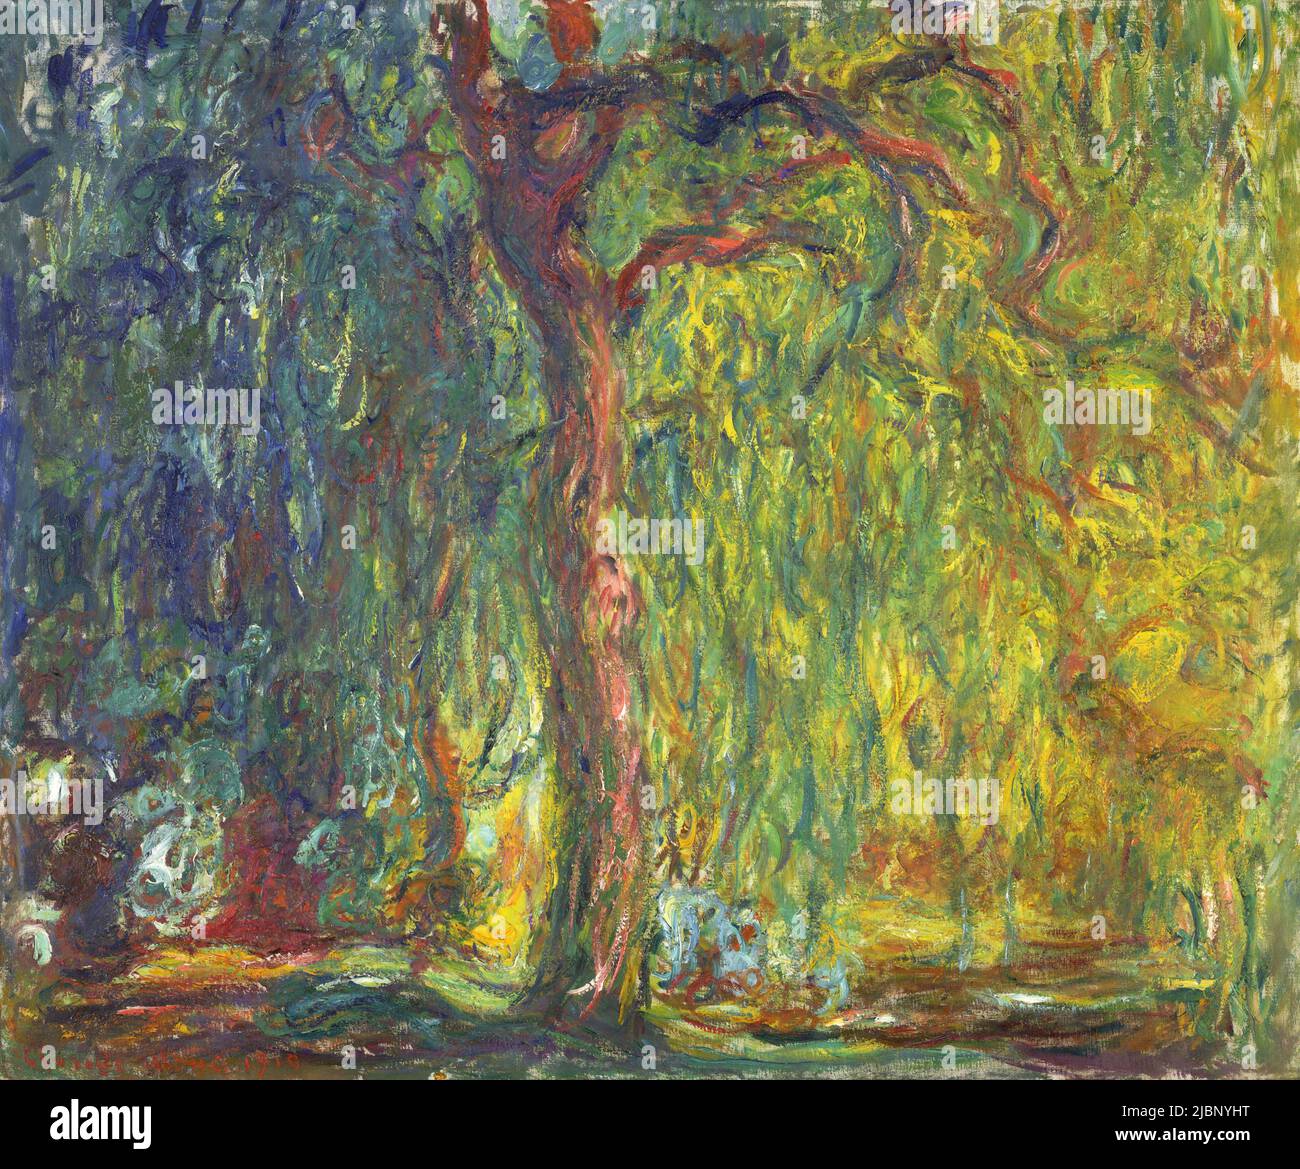 Weeping Willow, 1918–19, Monet's Weeping Willow paintings were an homage to the fallen French soldiers of World War I. Painting by Claude Monet Stock Photo